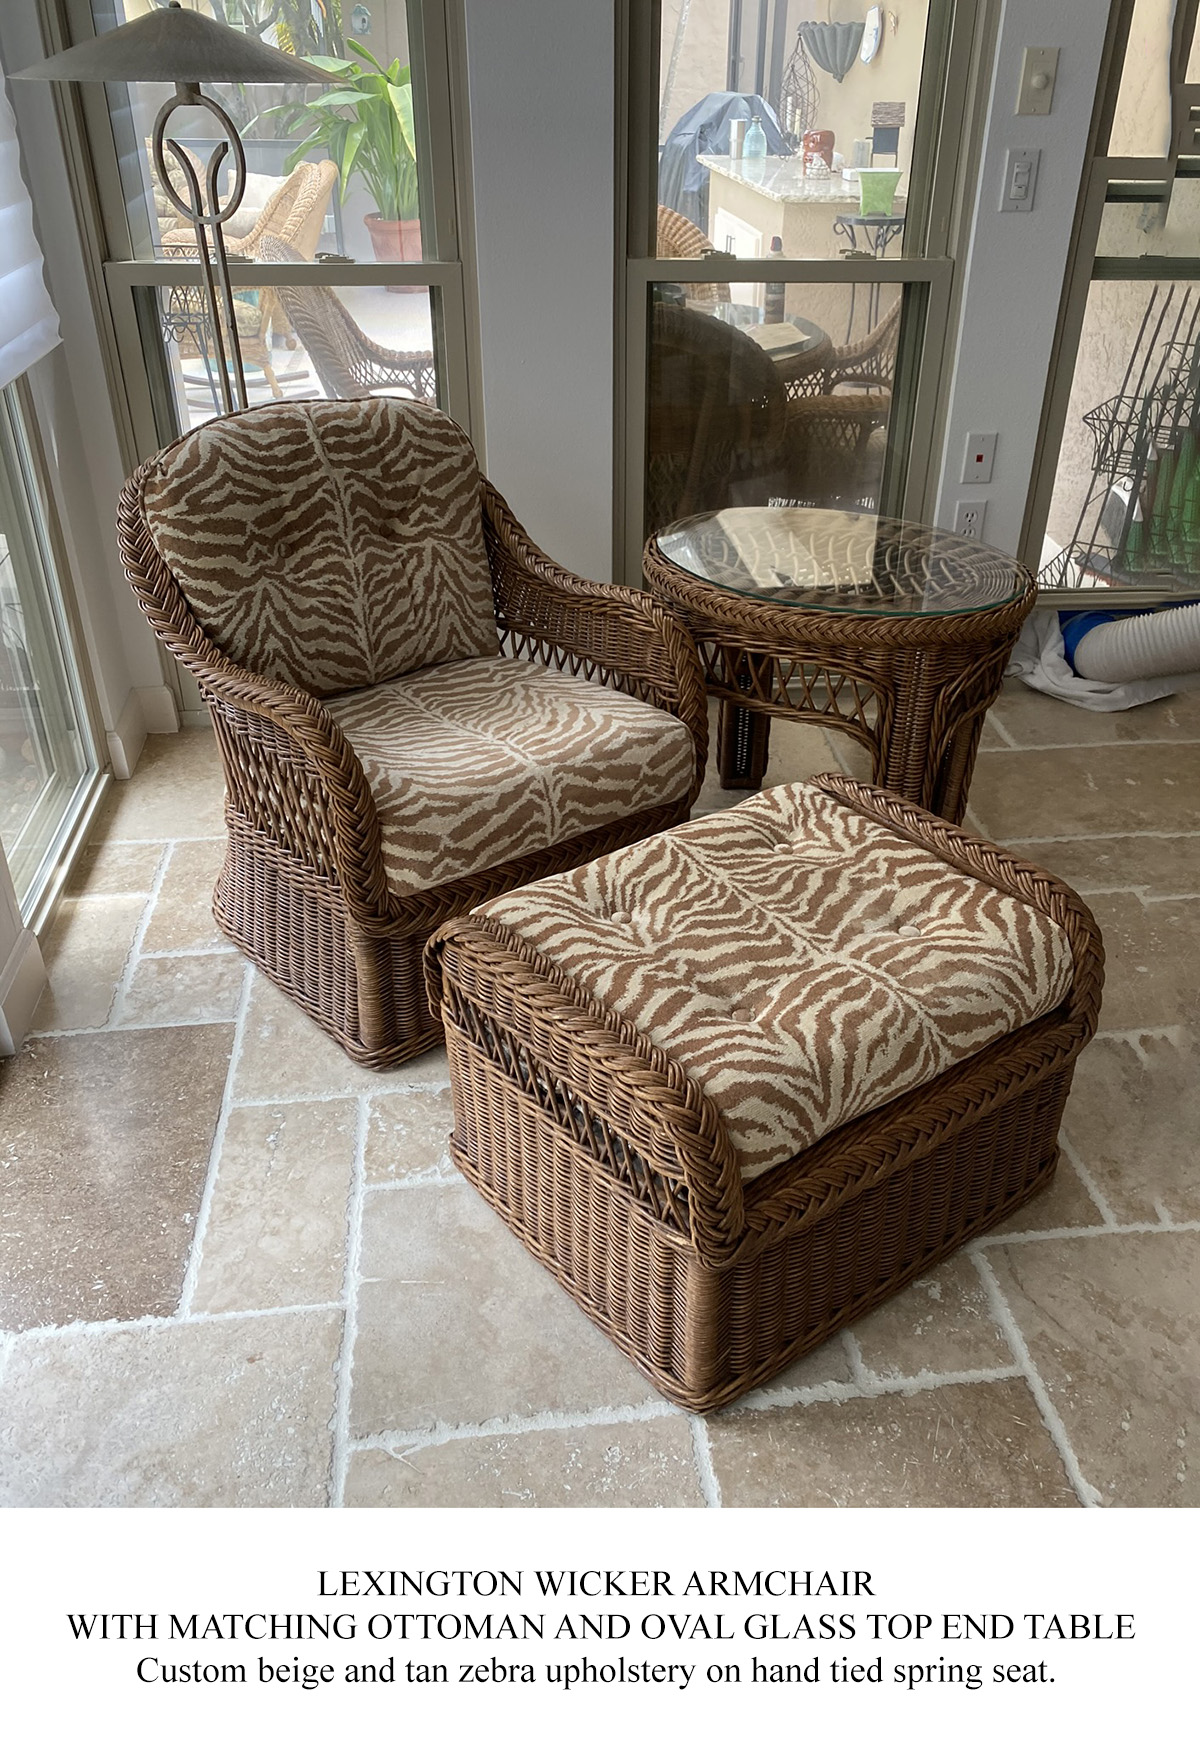 LEXINGTON WICKER ARMCHAIR WITH MATCHING